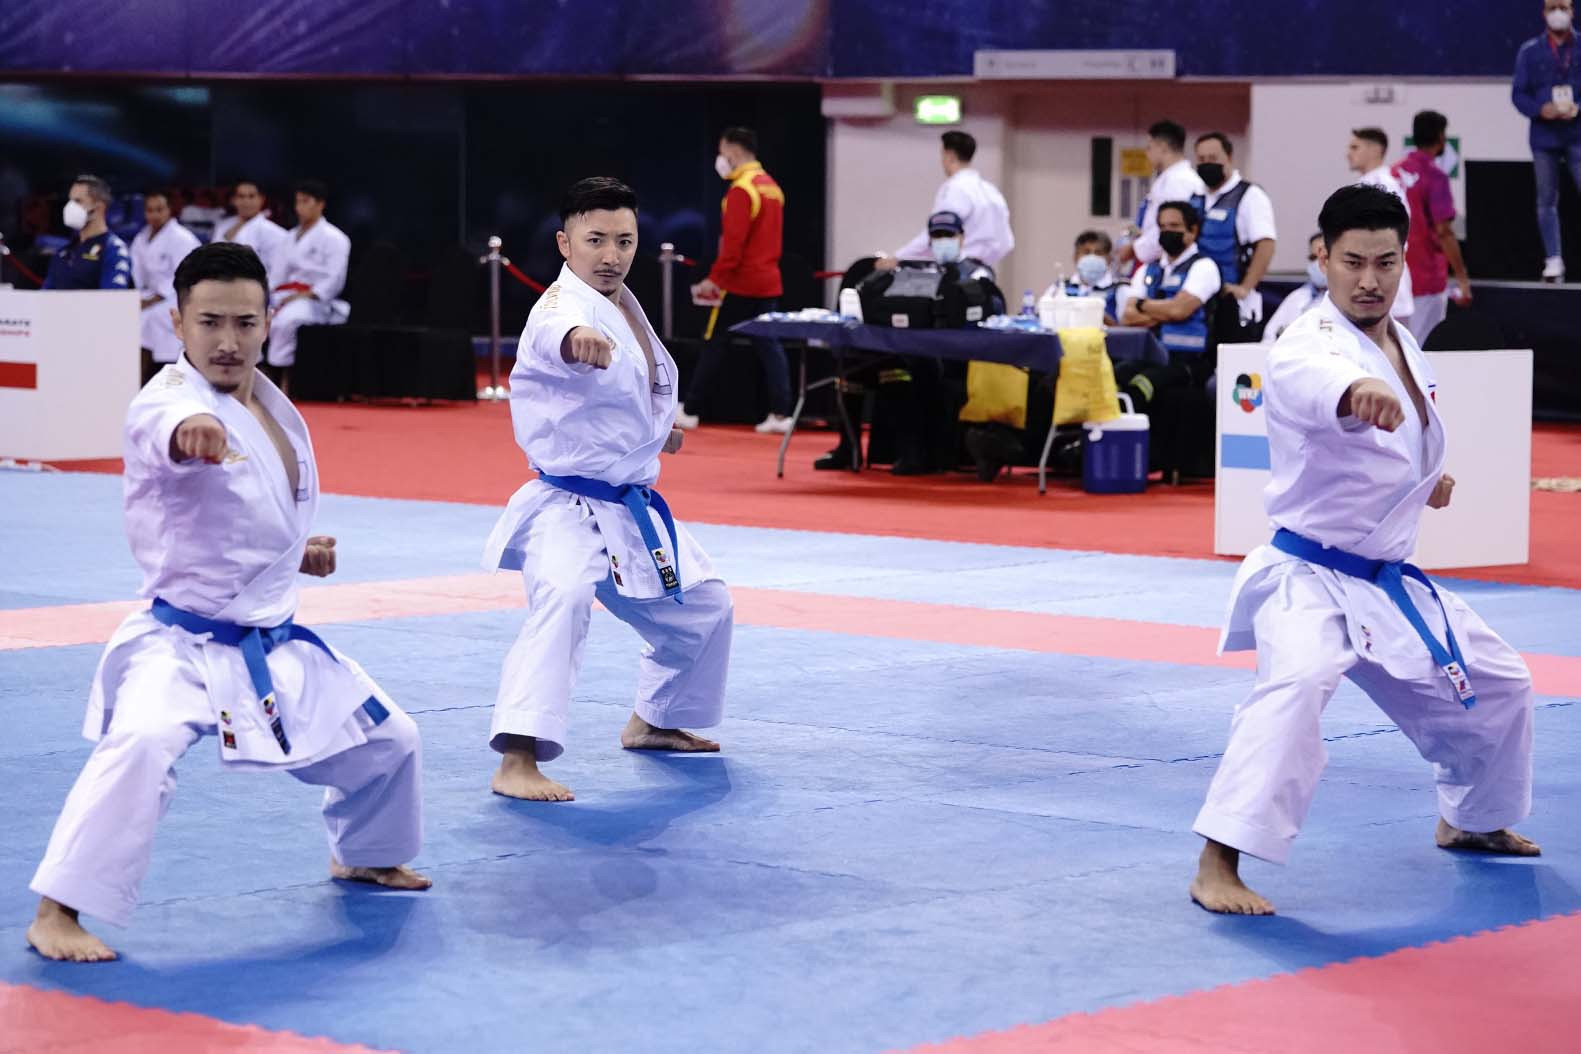 Japan will take on Spain for men's team kata gold for the second straight World Championships ©WKF